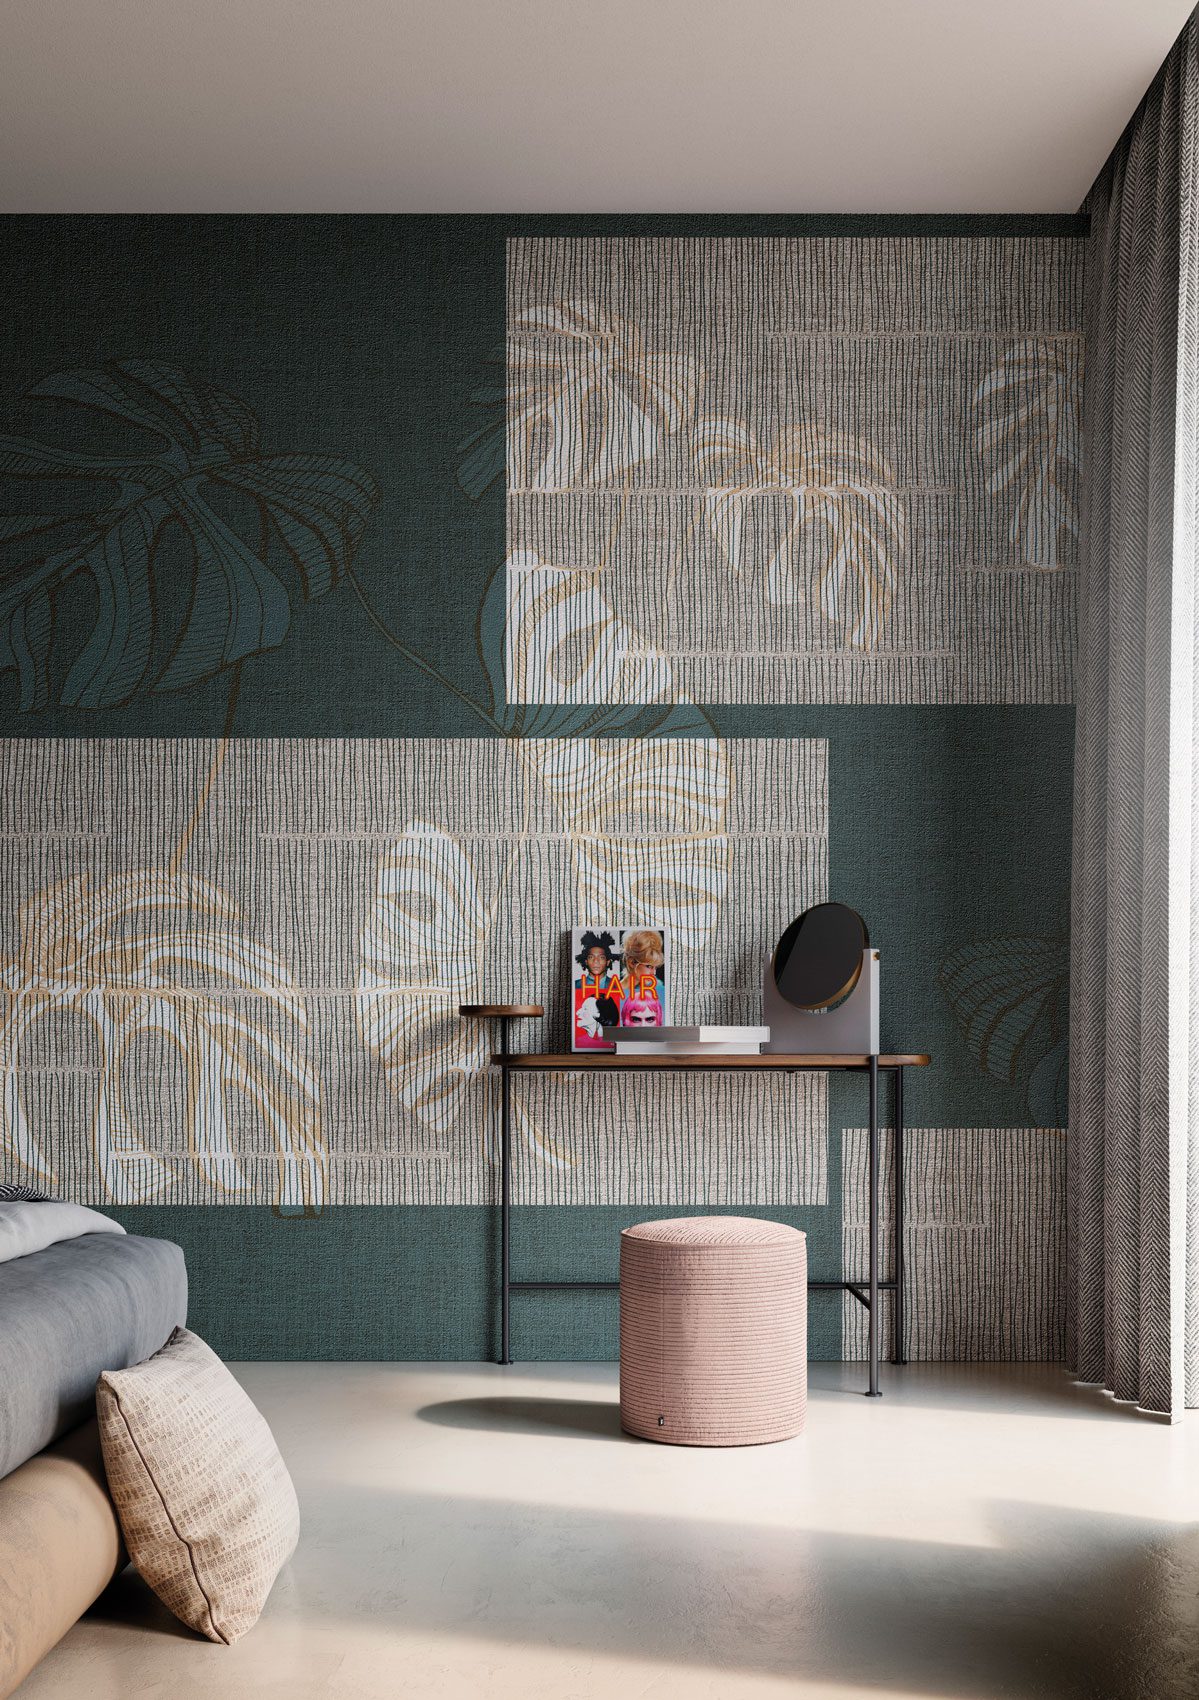 Cerisa artistic nature-themed wallpaper with leaves from the Avenue Instabilelab catalogue.